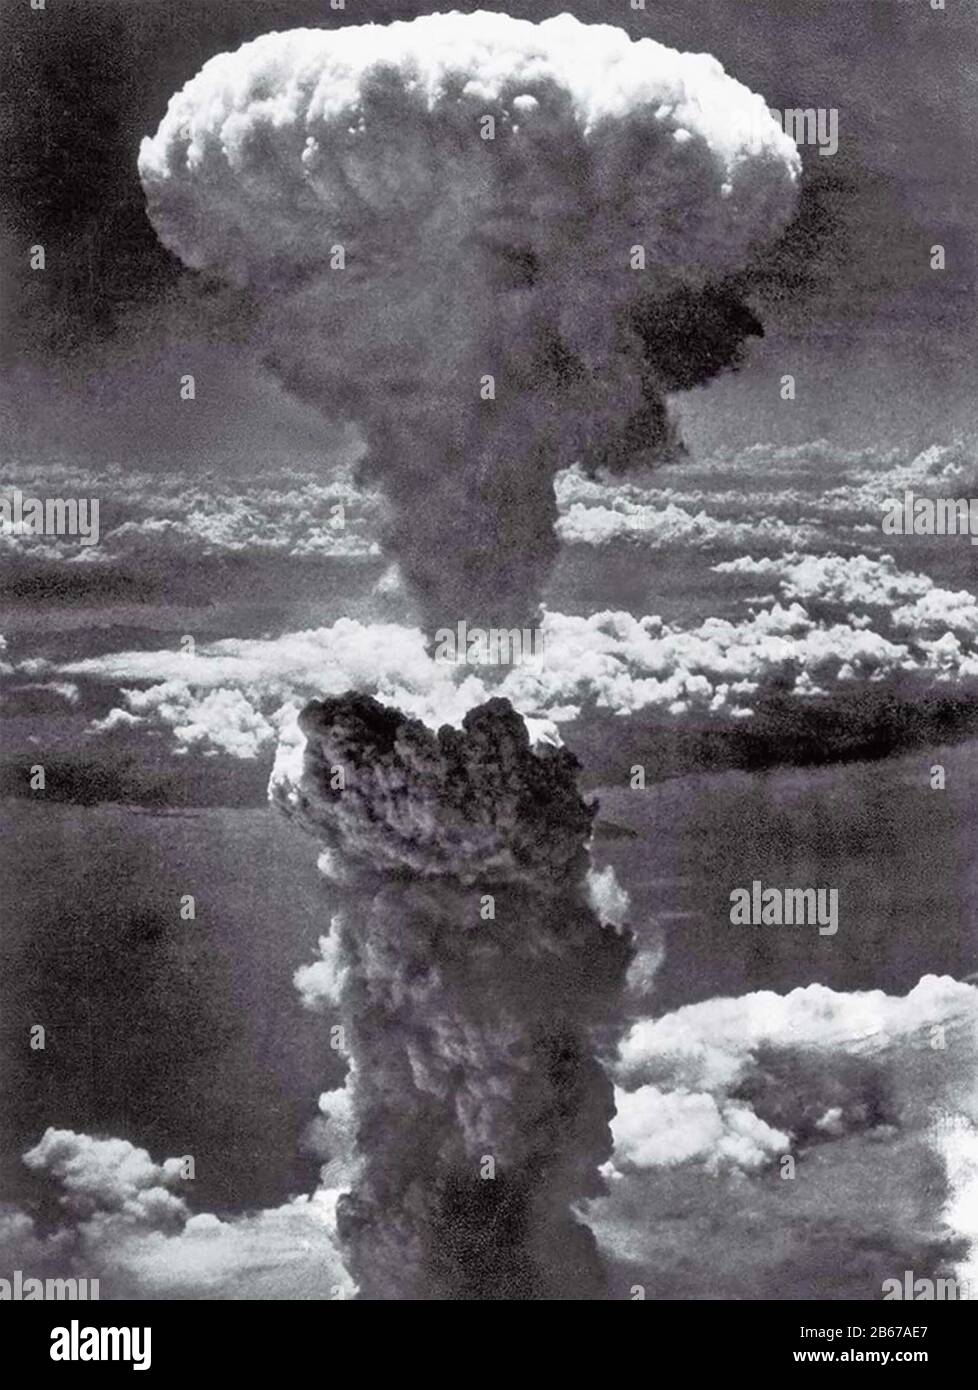 NAGASAKI ATOMIC BOMB 9 August 1945.  The Fat Man bomb sends up a 45,000 foot dust cloud.Photo: USAAF bombardier Lieutenant Charles Levy Stock Photo